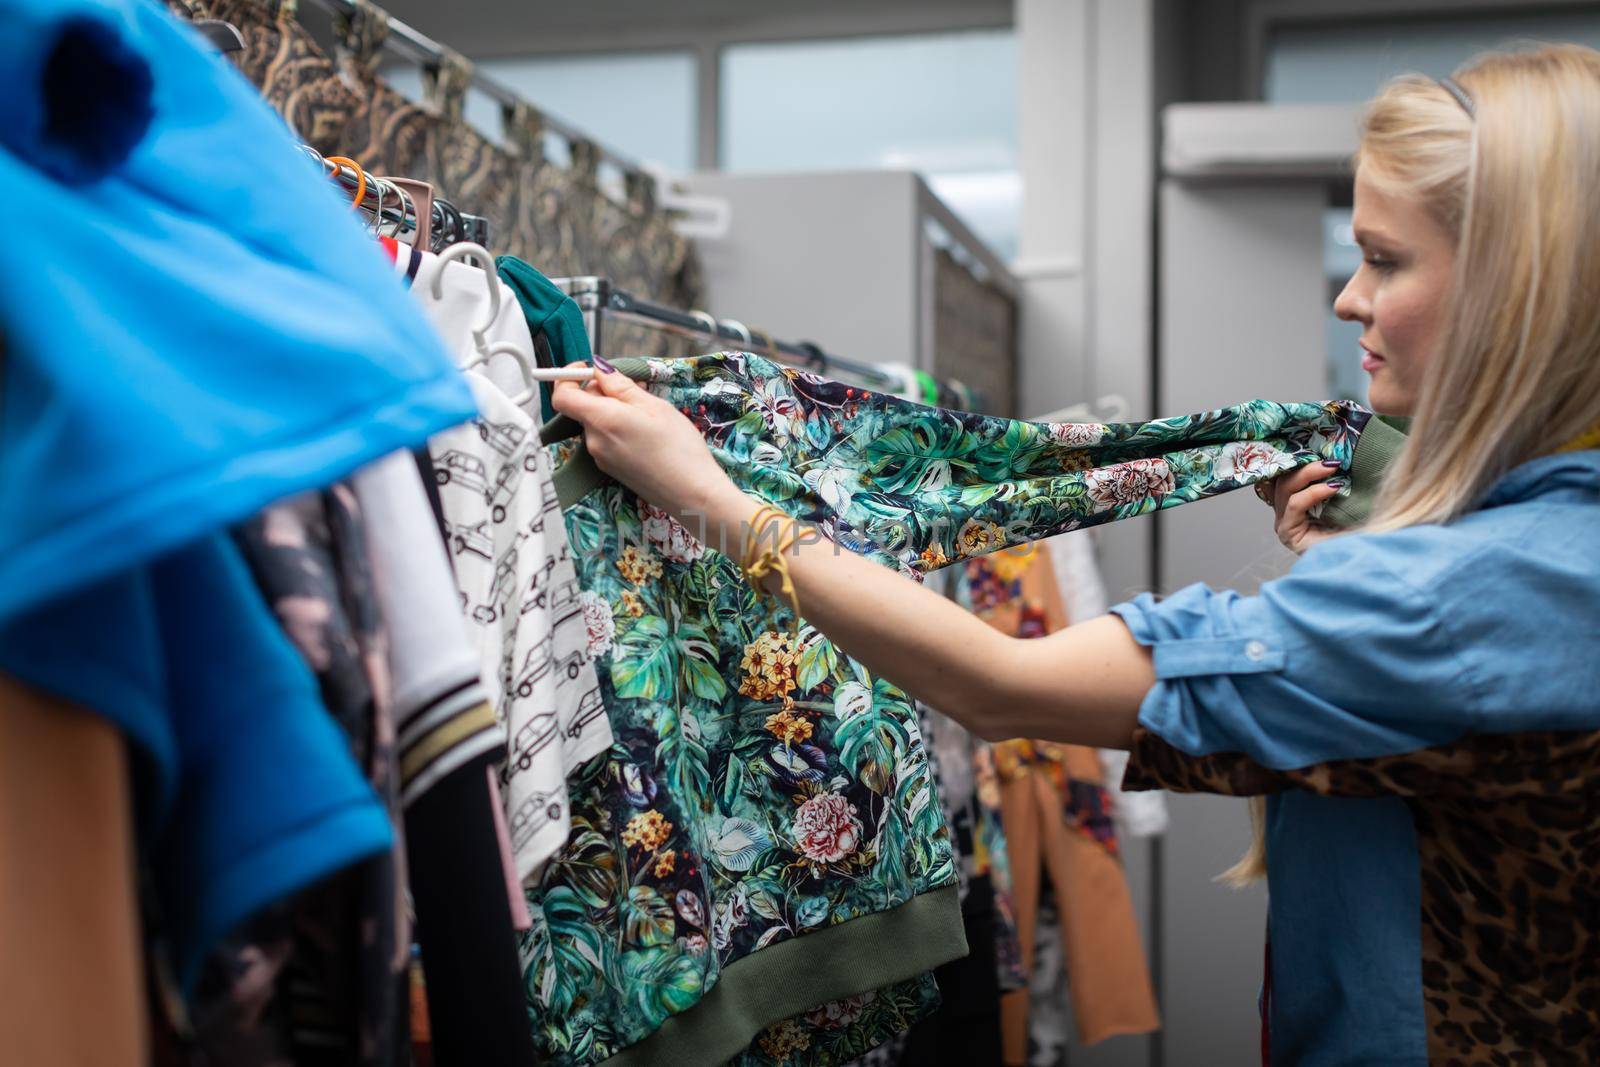 A woman looks at the new clothes hanging on the hangers. A blonde woman with long hair looks for the right blouse for her.